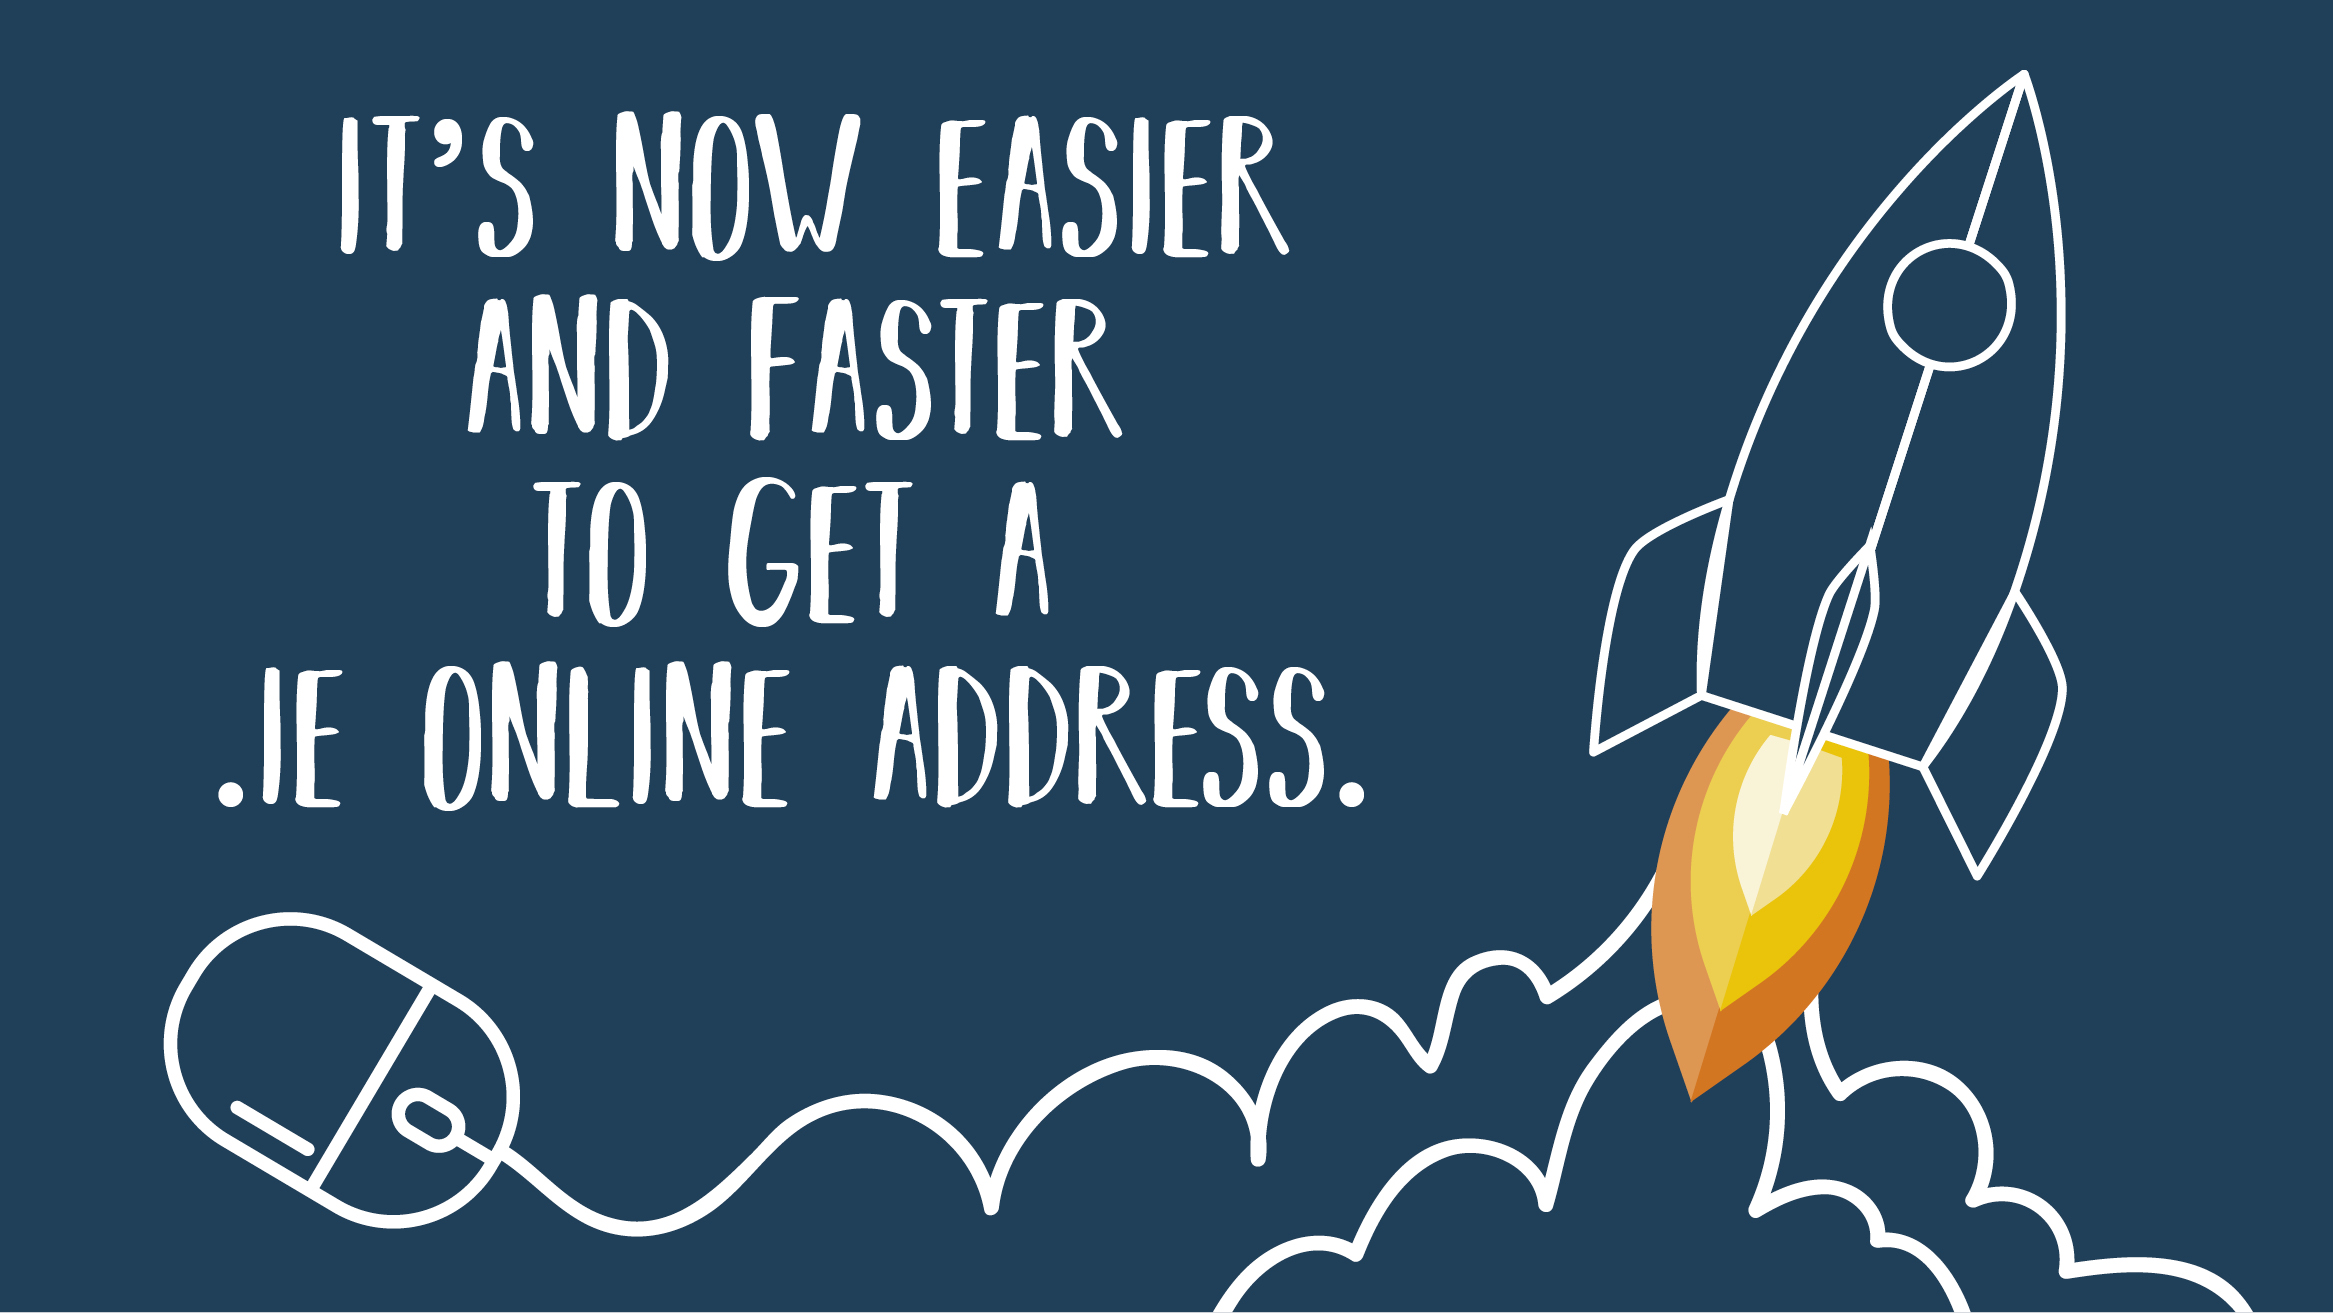 Graphic - It's now easier and faster to get a .ie online address.-Best ever half-year period for .ie